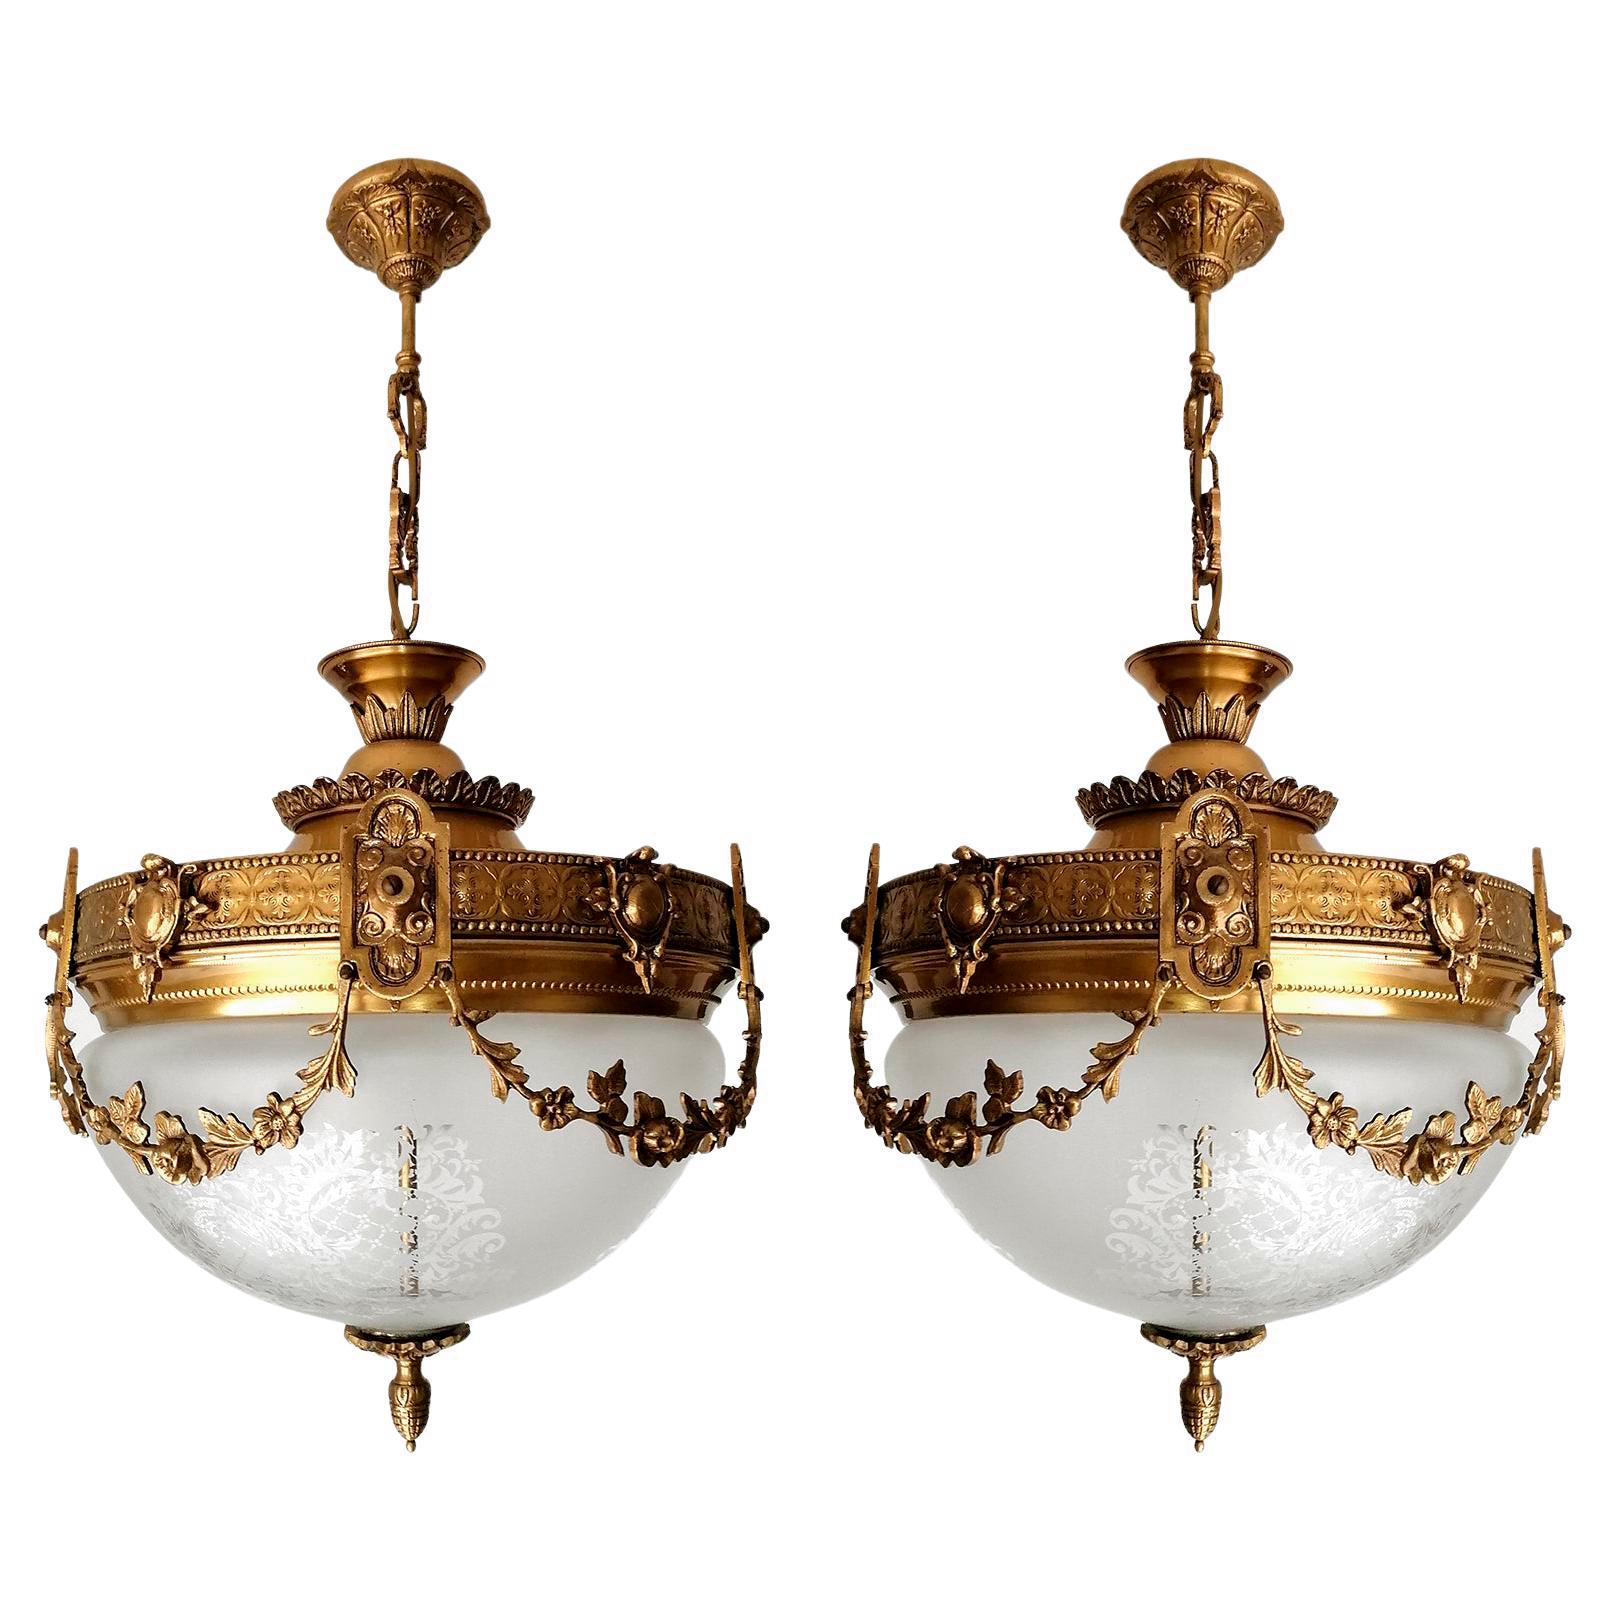 A pair of wonderful gilt bronze and etched-glass two-light ceiling fixture decorated with Fine ornaments and garlands, France, early 20th century.
In very good condition - original etched-glass shades without damages, bronze with beautiful